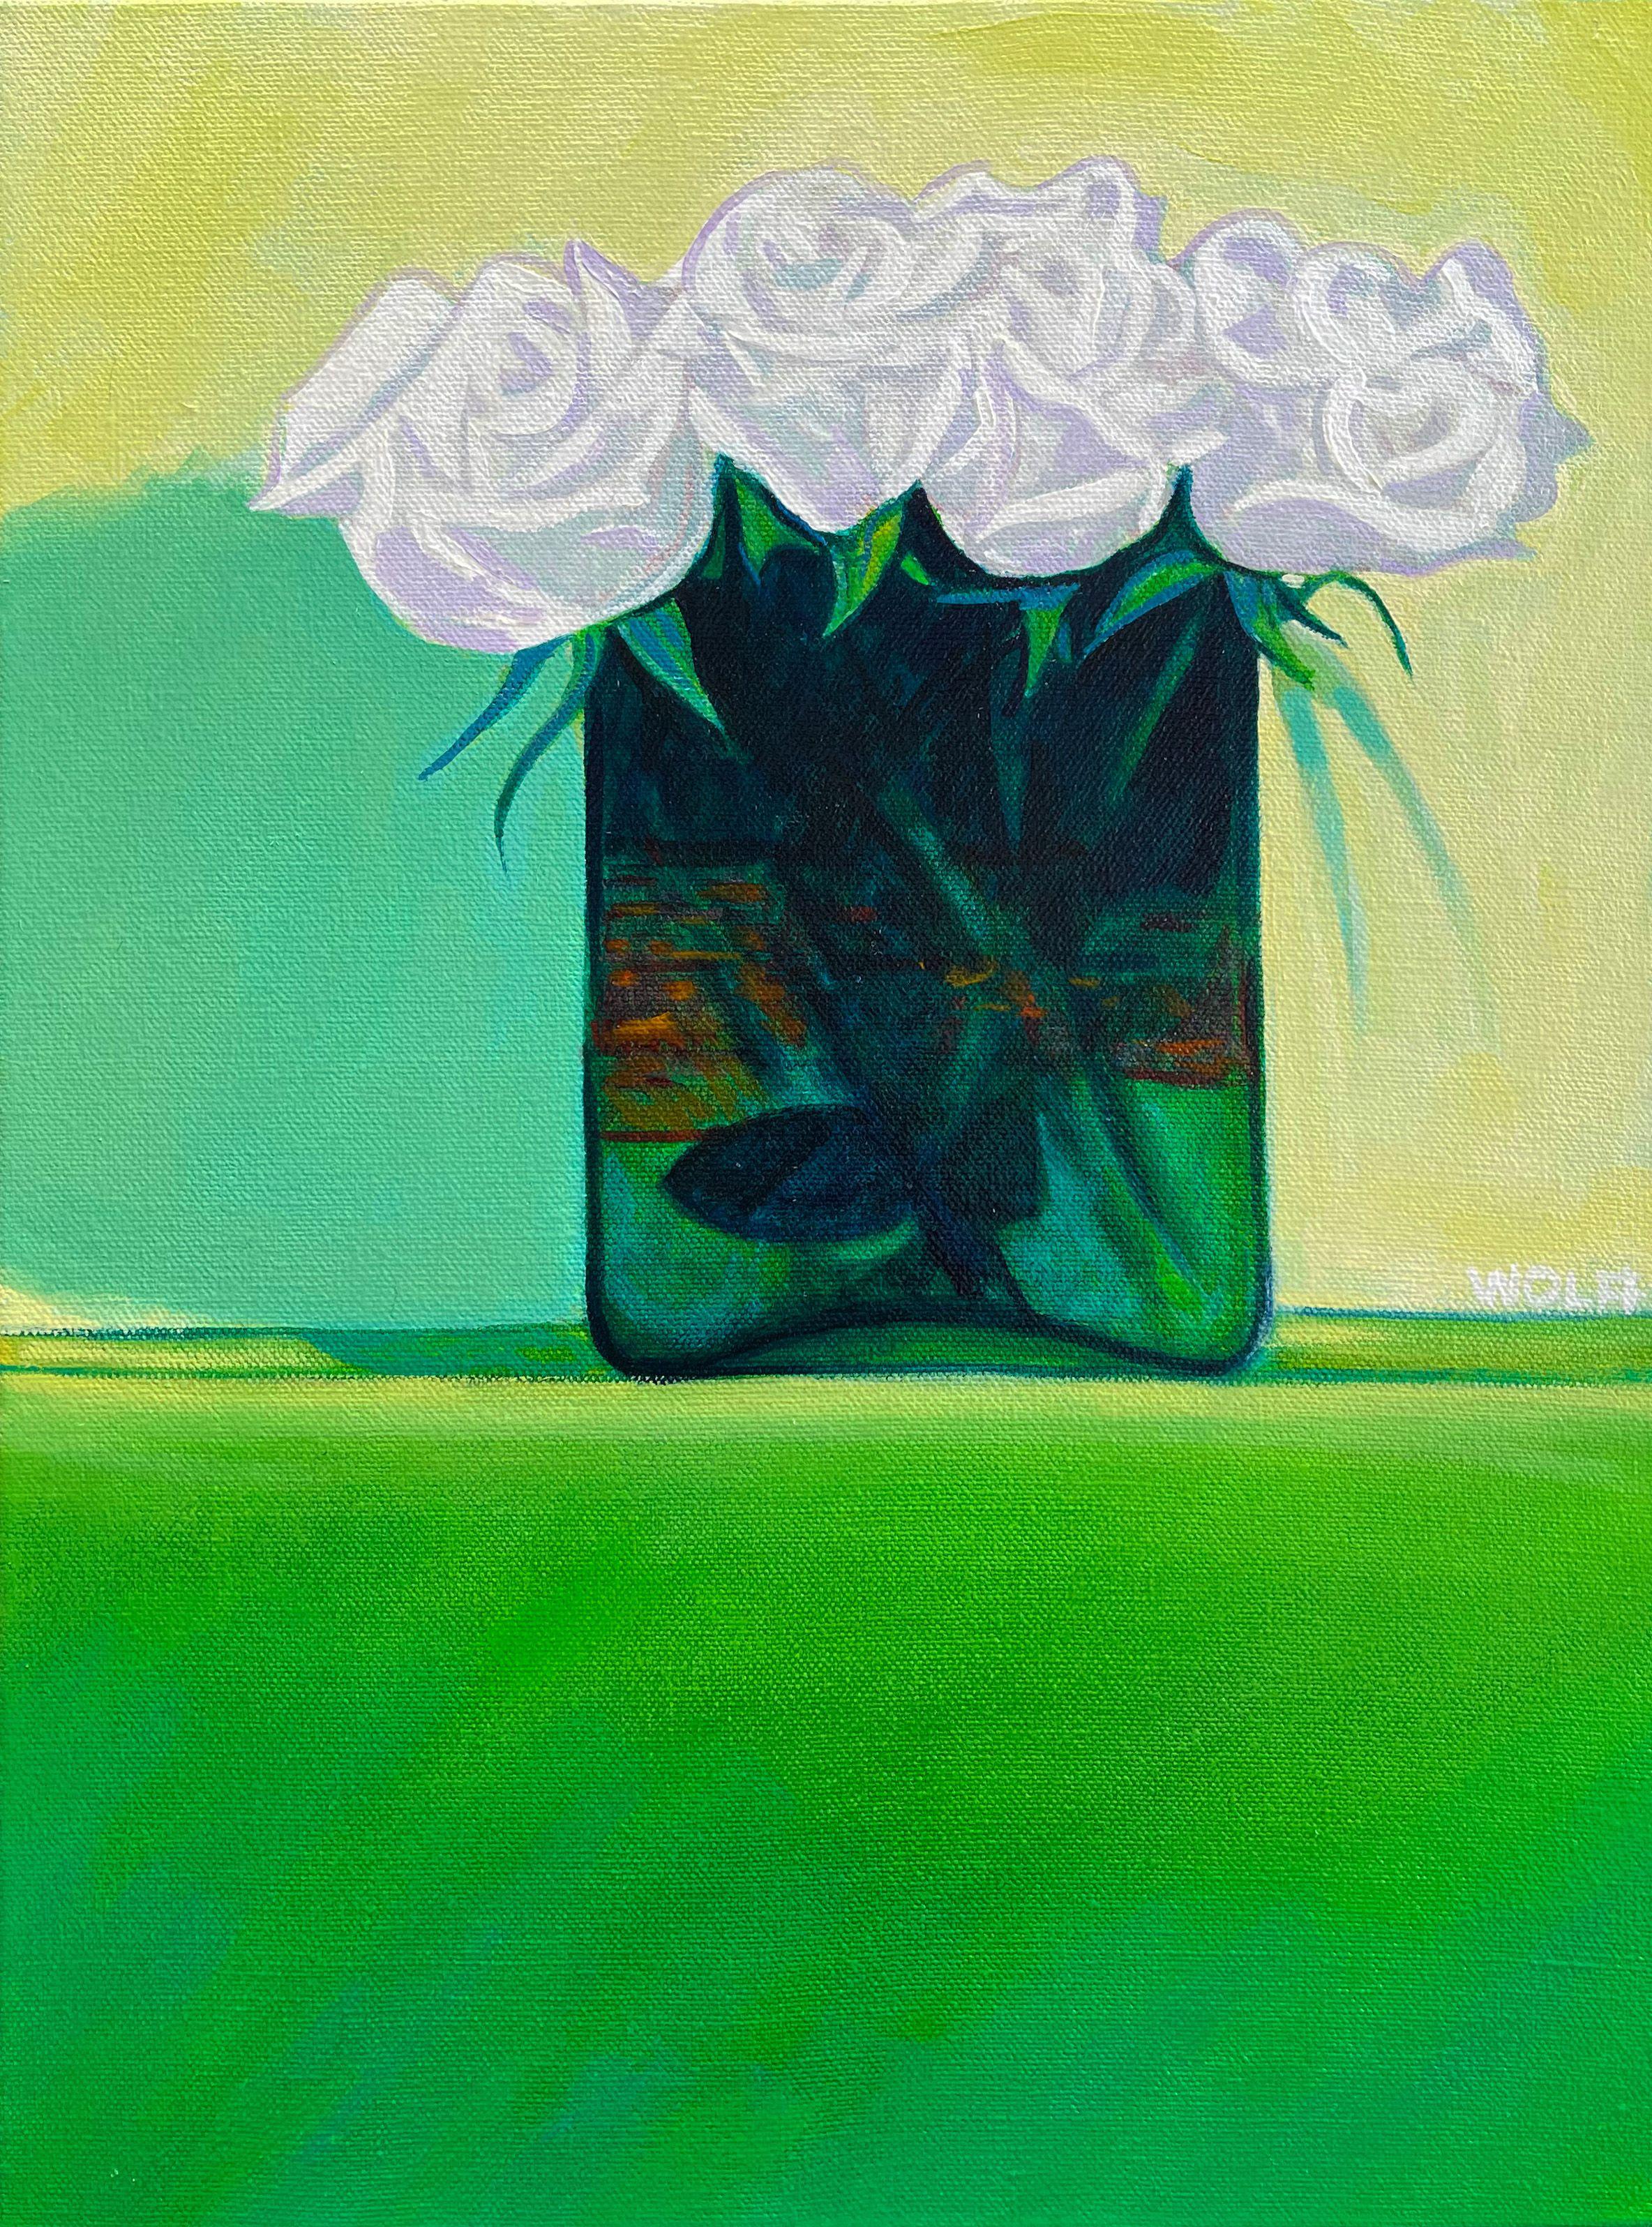 White roses in a green vase on a green shelf against a green wall. :: Painting :: Contemporary :: This piece comes with an official certificate of authenticity signed by the artist :: Ready to Hang: Yes :: Signed: Yes :: Signature Location: Middle